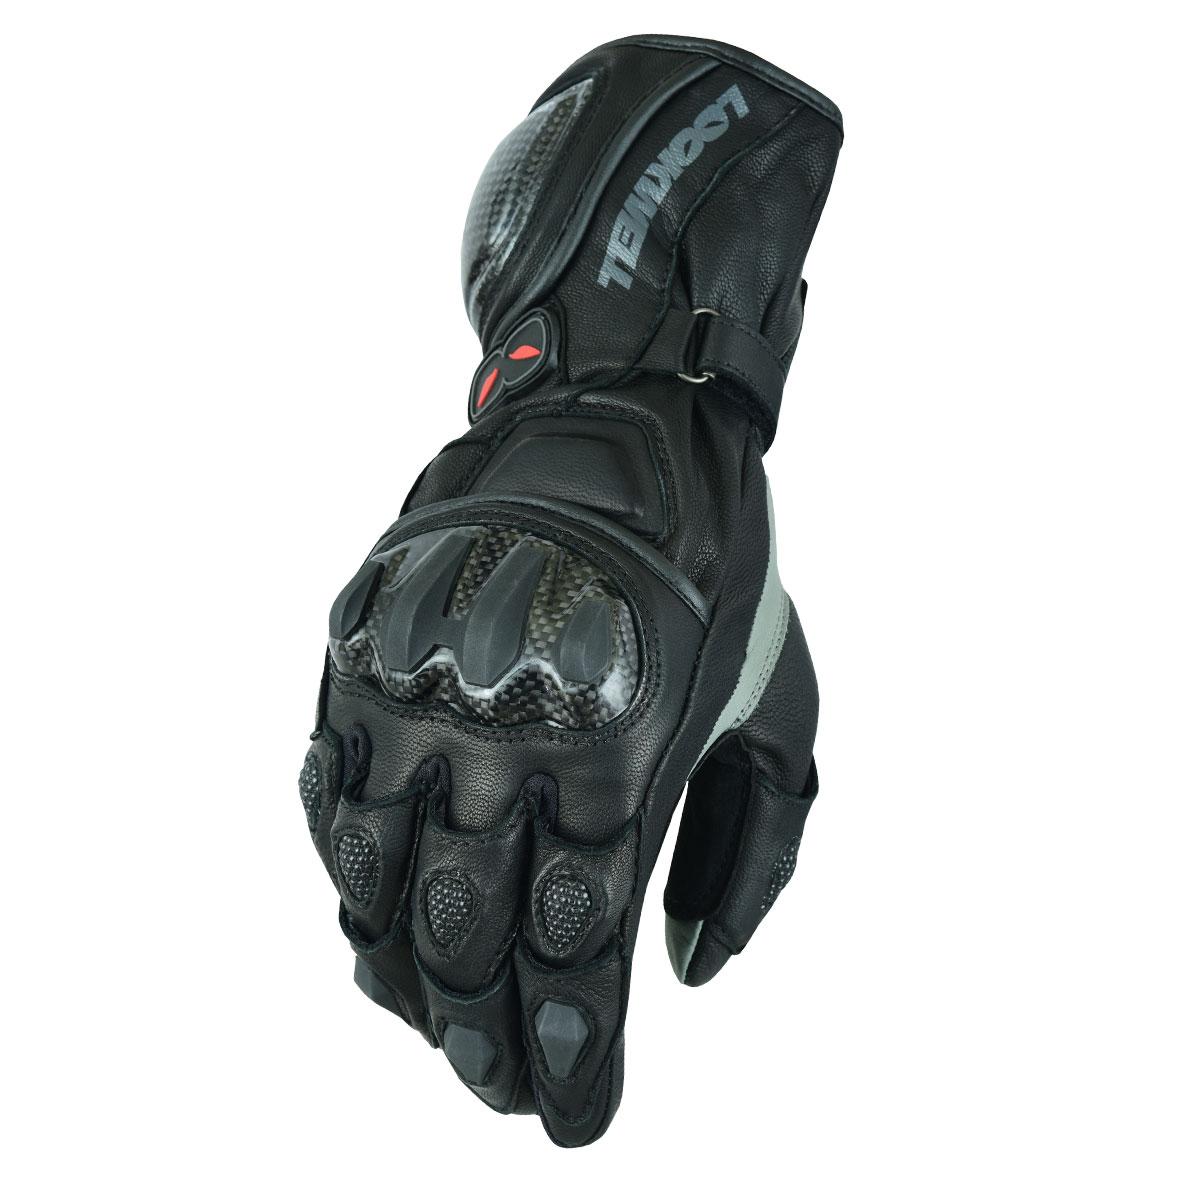 Spider Glove Back Relaxed trike-webshop